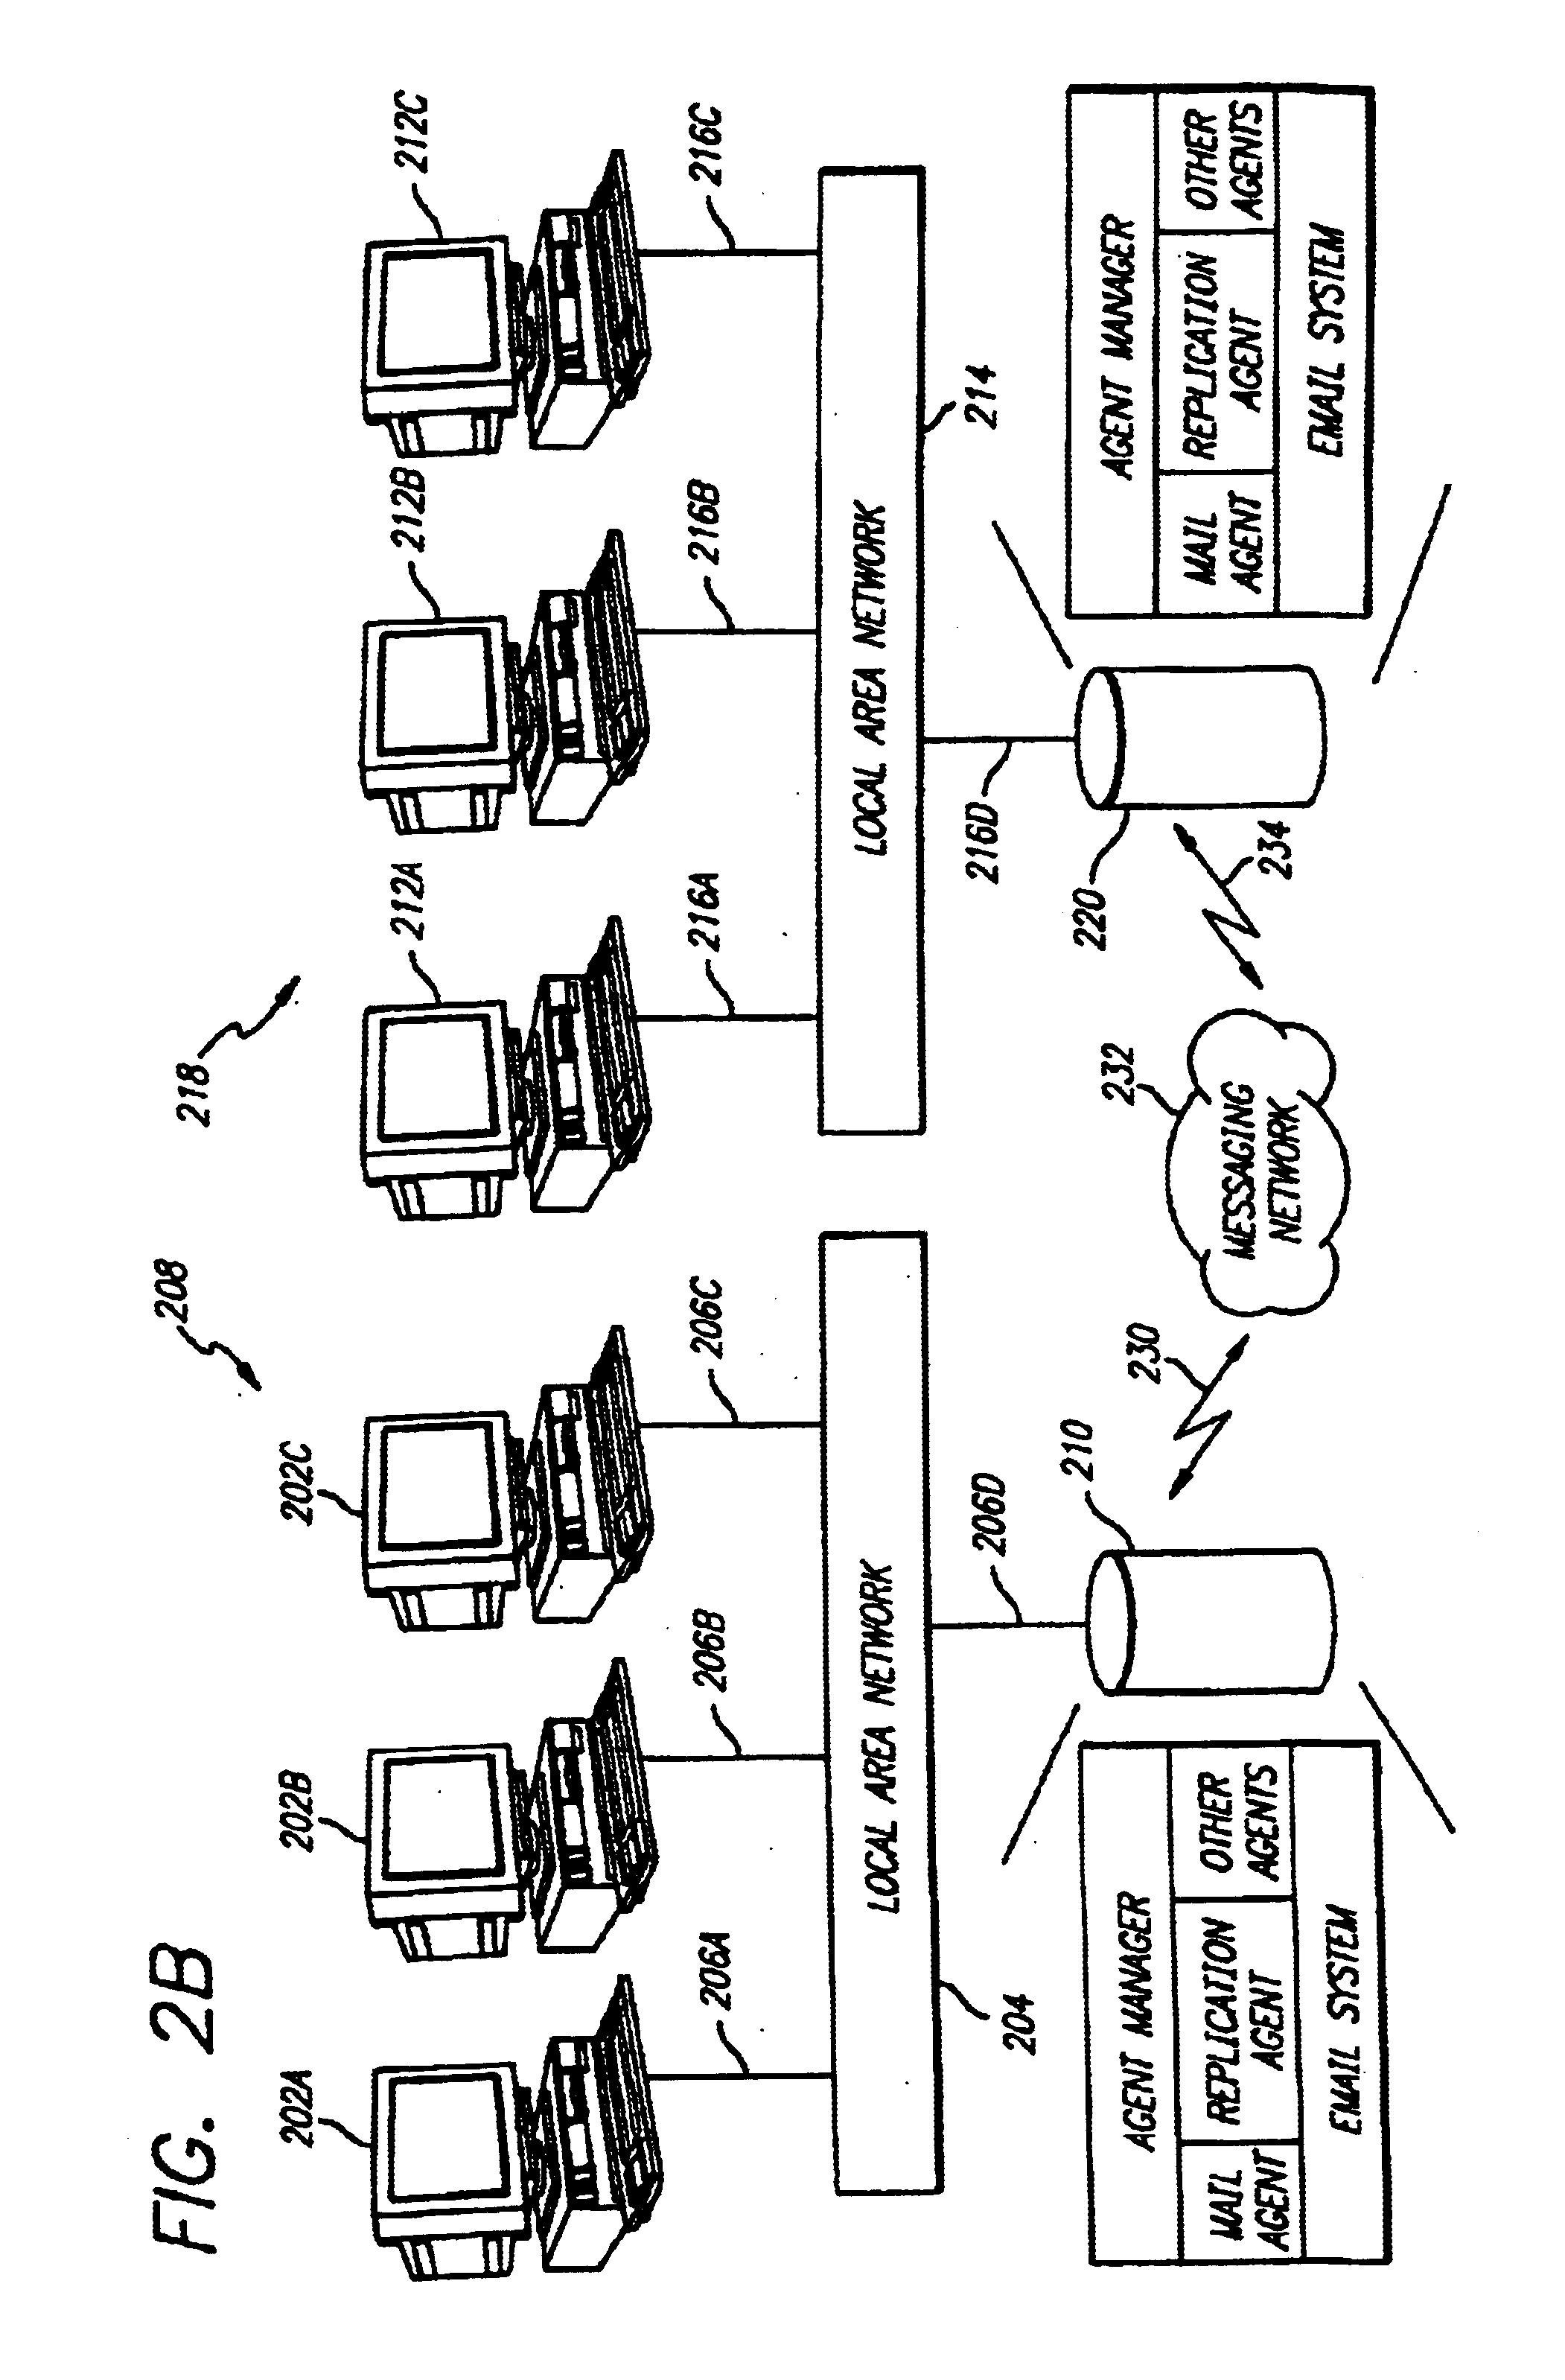 Method and apparatus for workgroup information replication